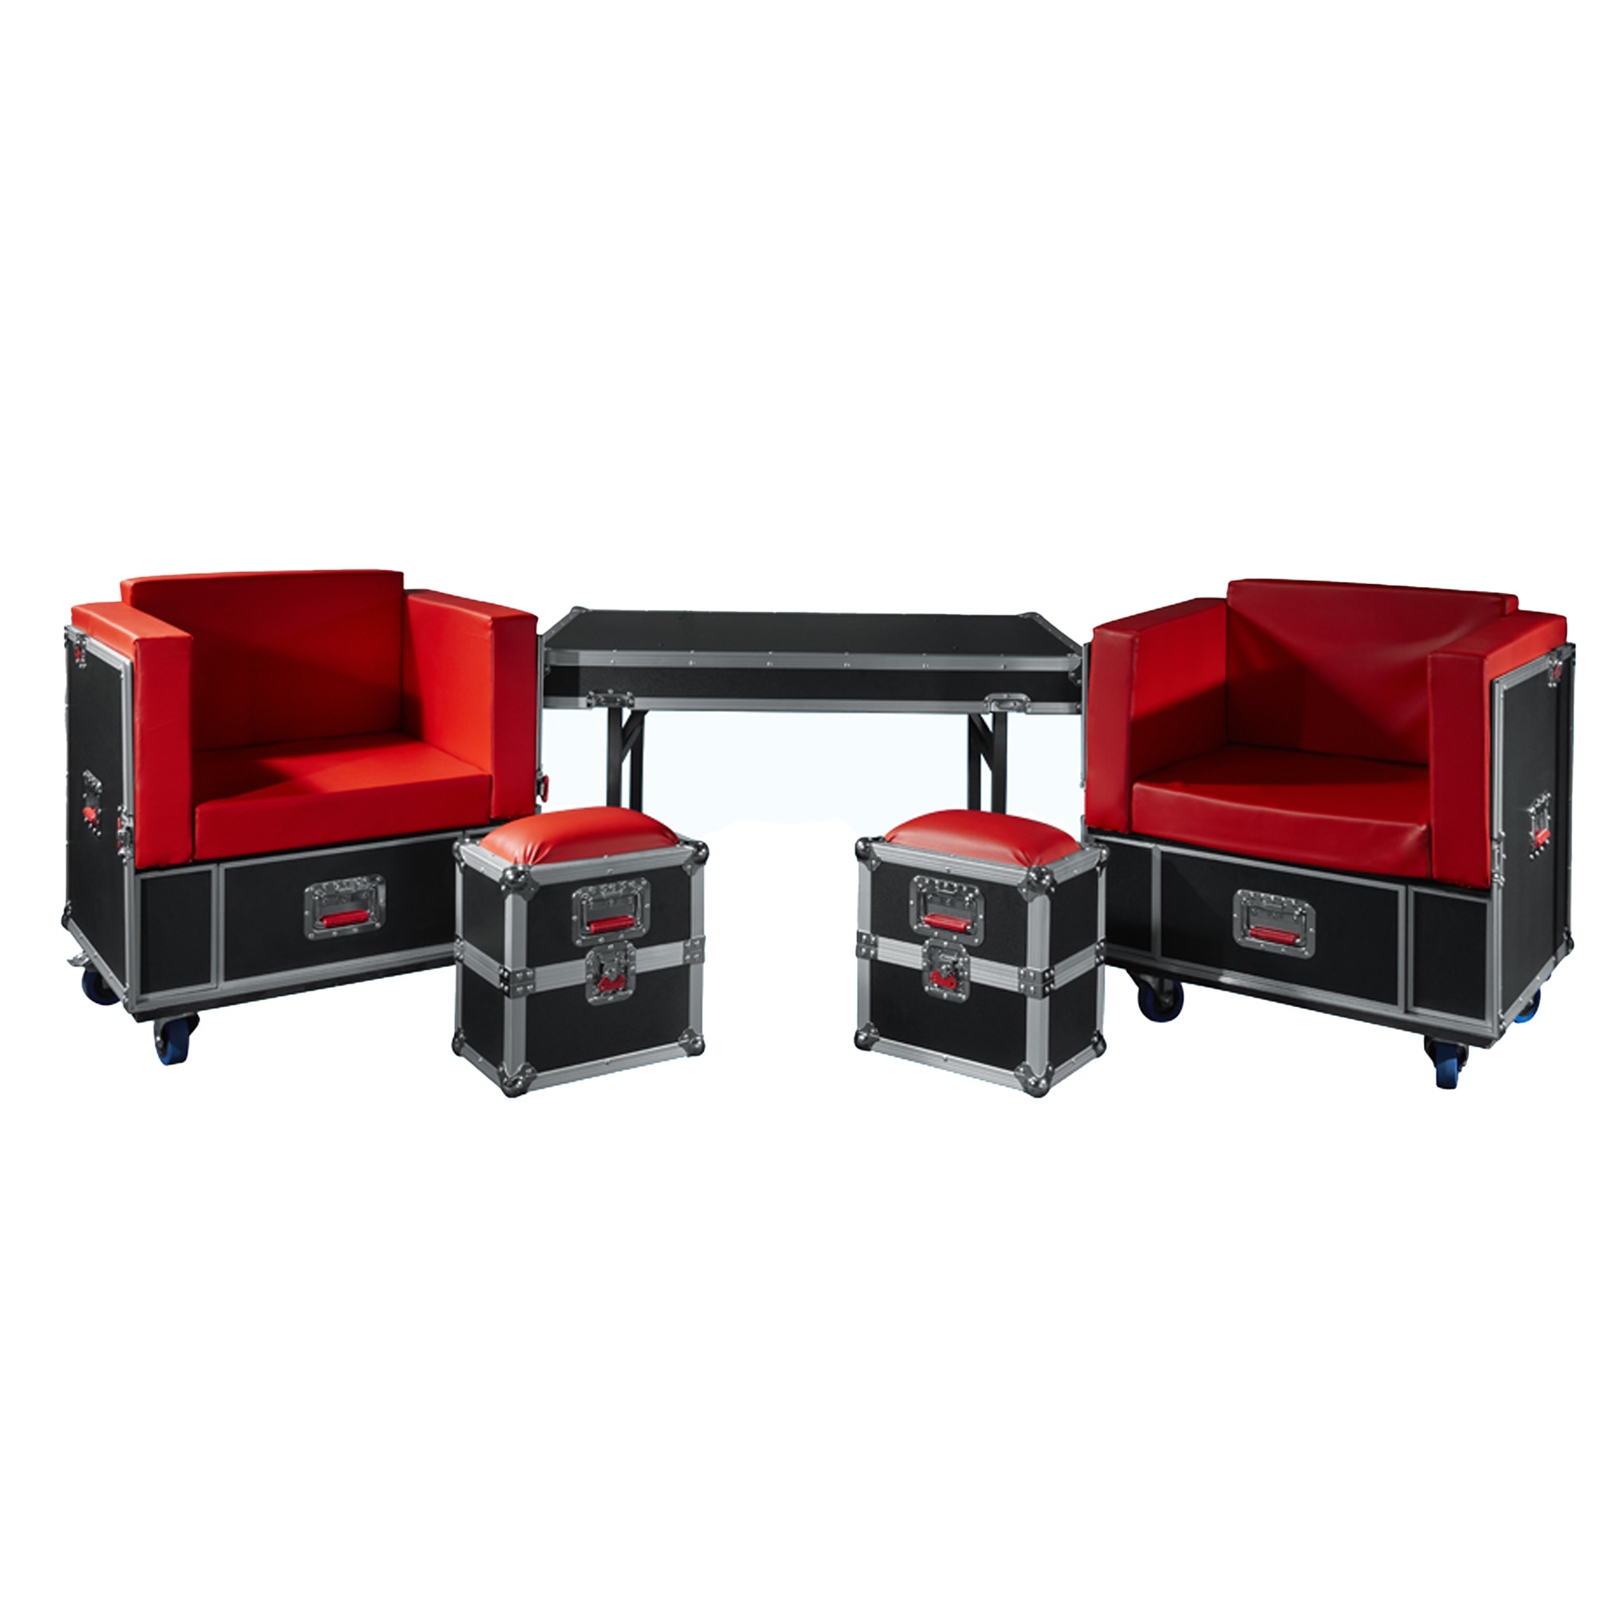 Gator Road Case Furniture Set - Transformable Into Shipping Cases